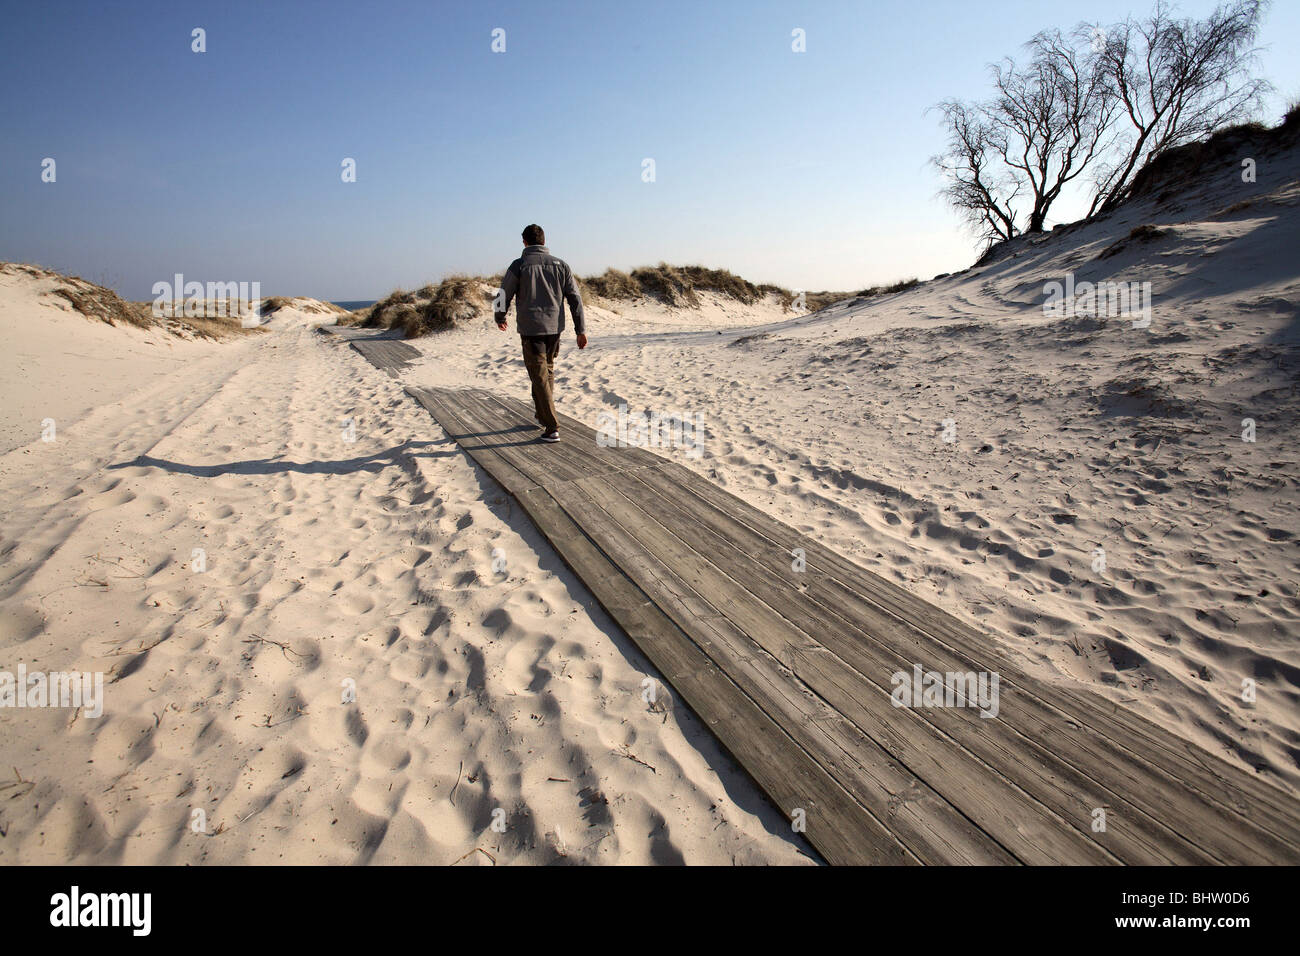 Man on a wooden walkway on a beach Stock Photo